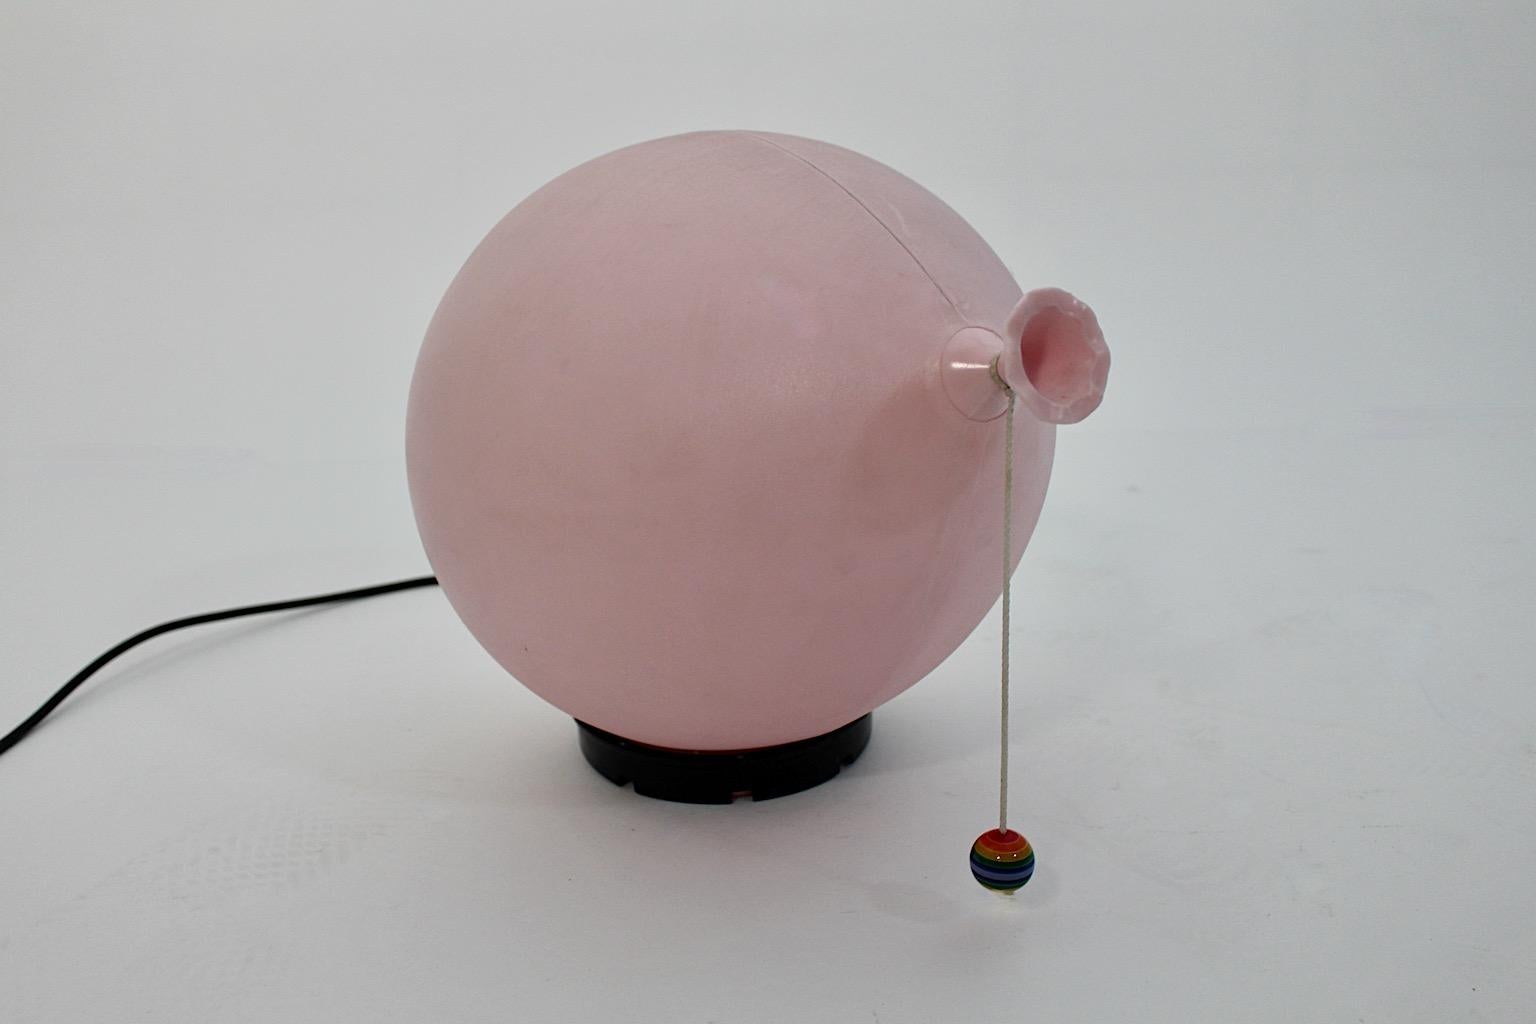 Italian modern vintage pink plastic balloon table lamp or sconce or wall lighting by Yves Christin for Bilumen, 1980s, Italy.
A stunning table lamp balloon like from plastic in pastel pink color with cable and plug and an on / off switch.
This